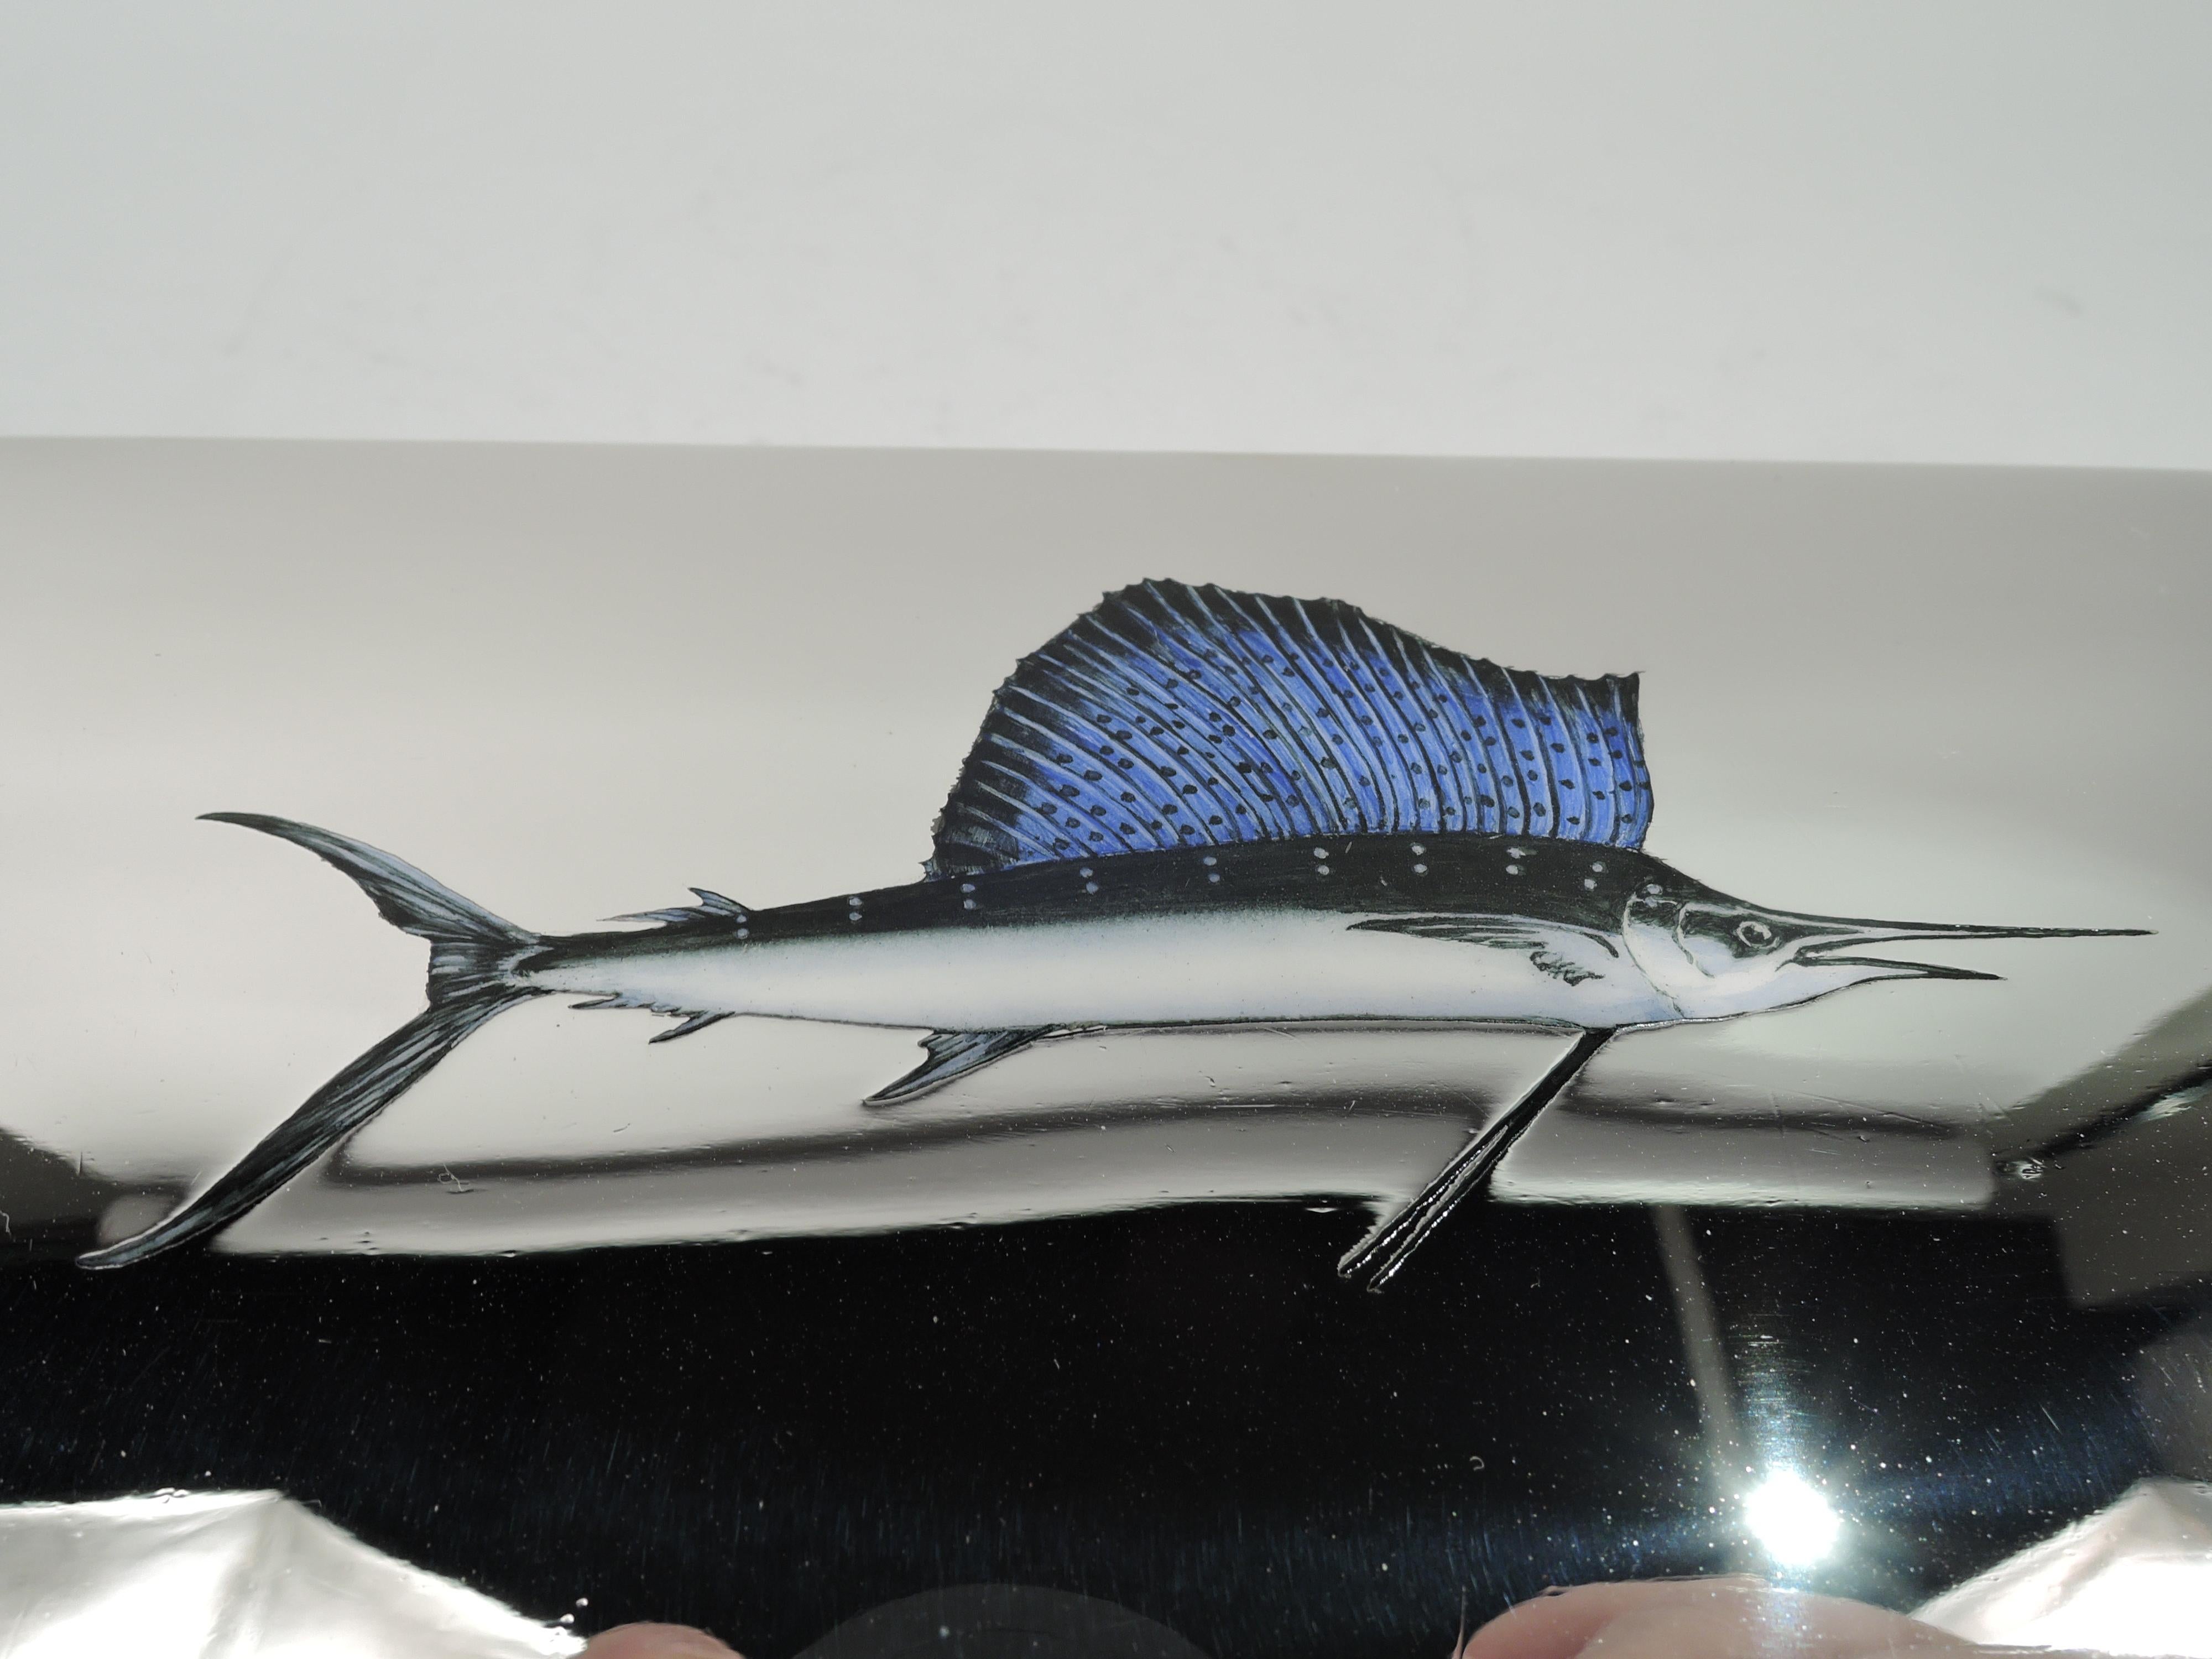 Modern sterling silver box. Made by Ahrendt & Kautzman in Newark, ca 1910. Rectangular with straight sides. Cover hinged and raised with overhanging rim. On cover top is an enameled swordfish. A realistic depiction with spotted blue dorsal fin and